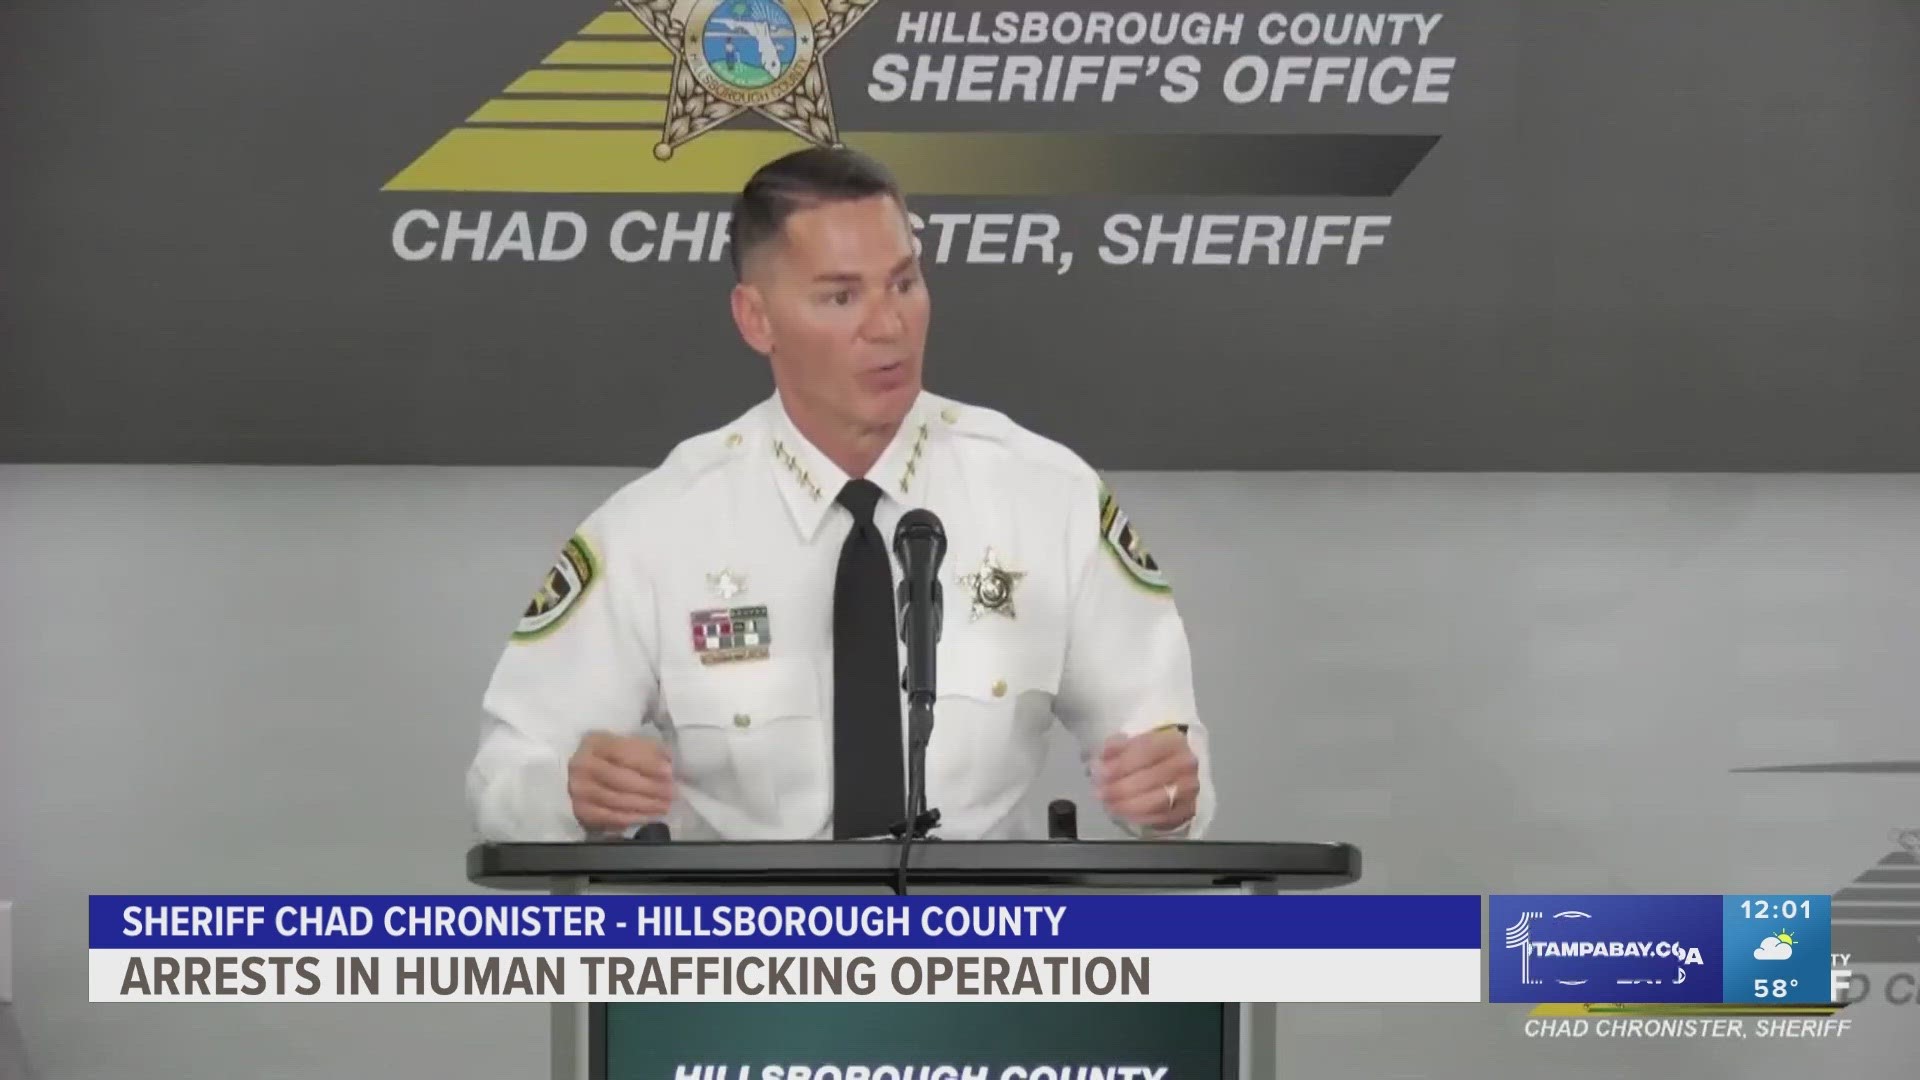 Hillsborough County sheriff Chad Chronister outlined a sting operation leading to the 123 arrests on human trafficking-related charges.